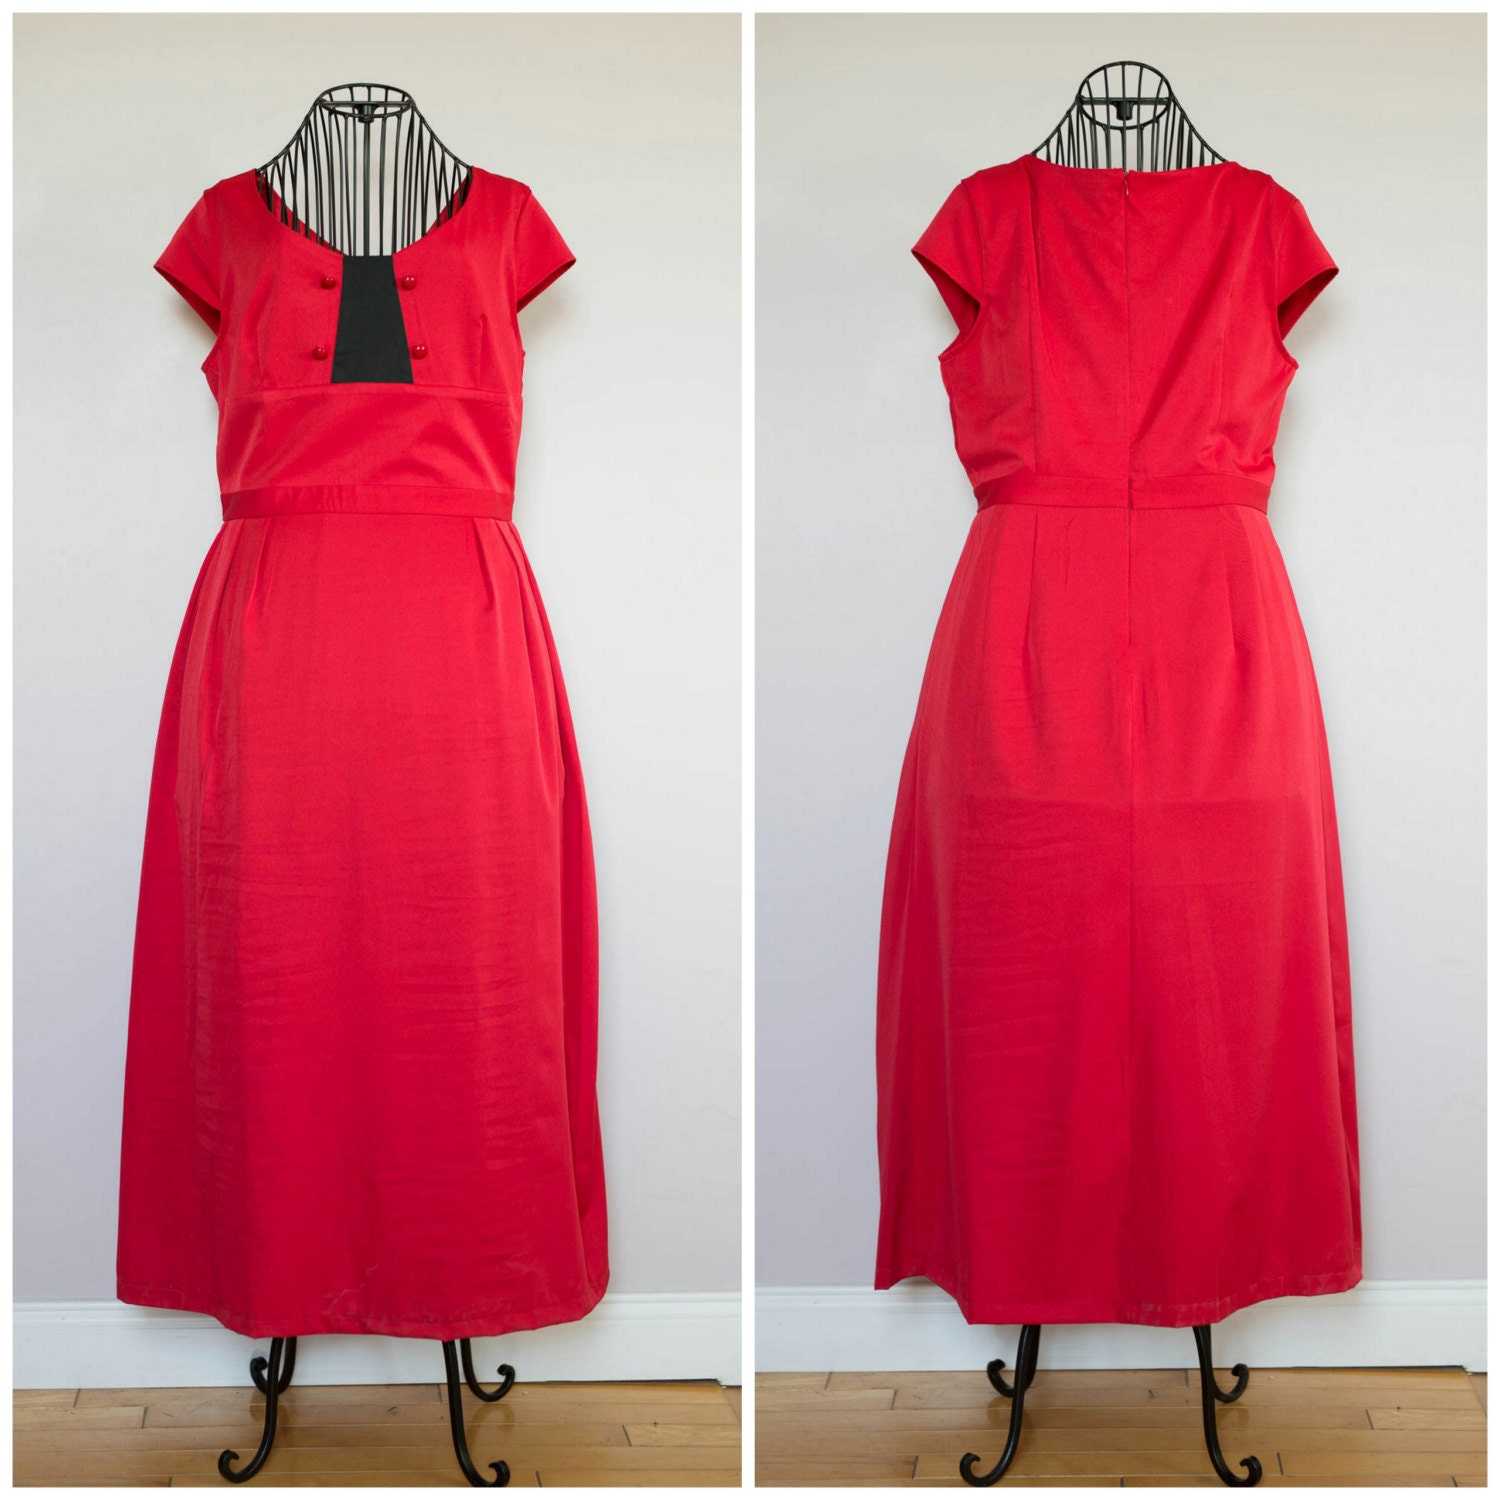 Vintage Retro Lindy Bop Pin up Style Red Dress Lrg Red - Etsy